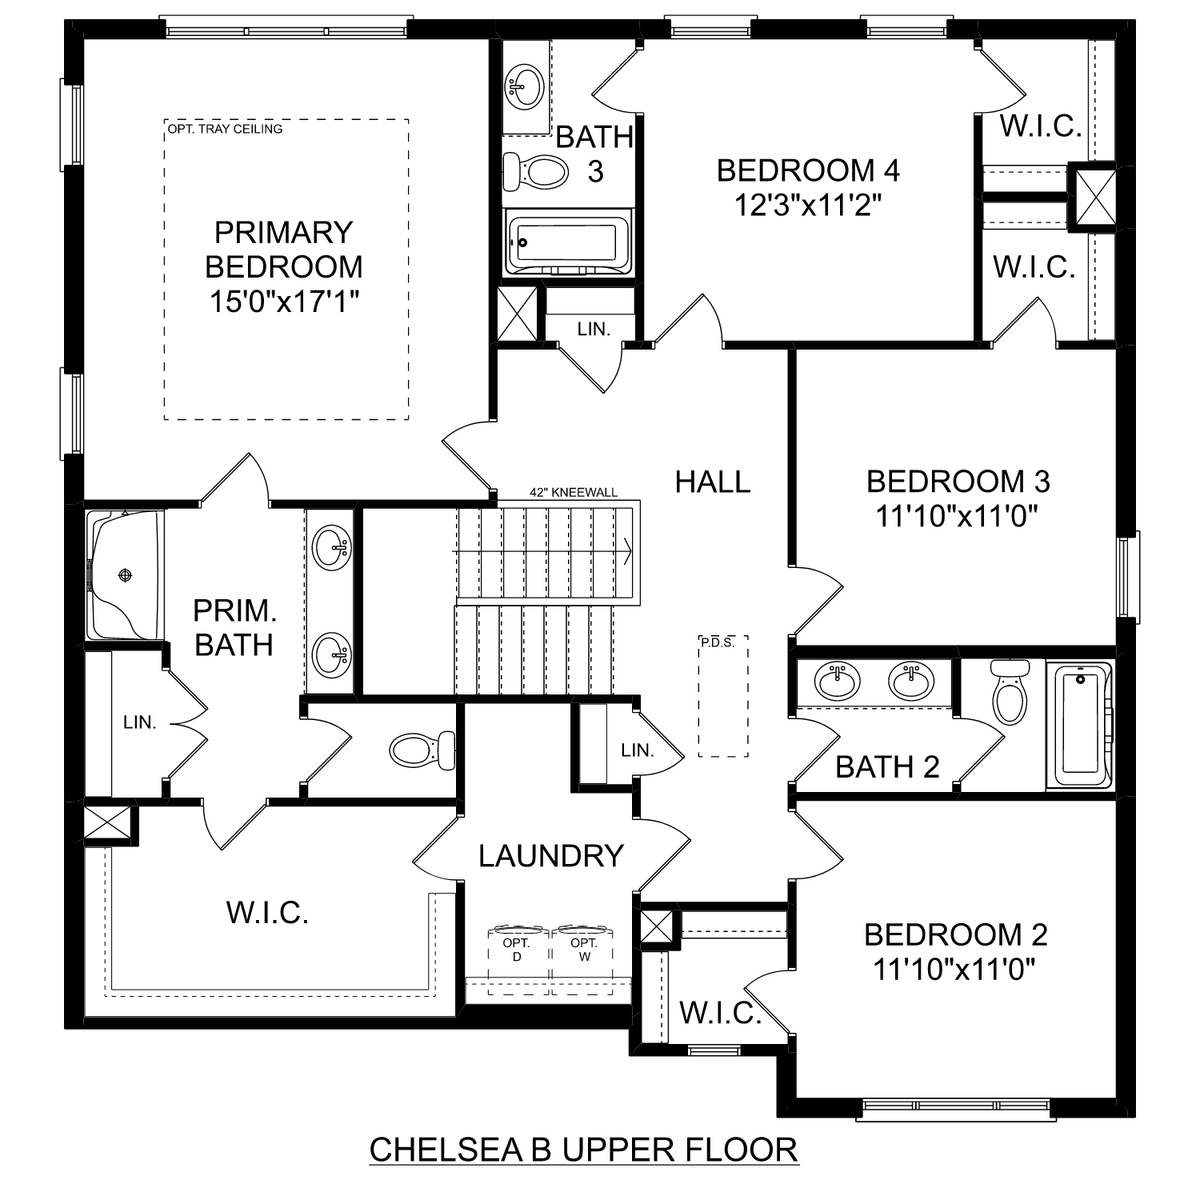 2 - The Chelsea B floor plan layout for 29532 Canoe Circle in Davidson Homes' Creekside community.